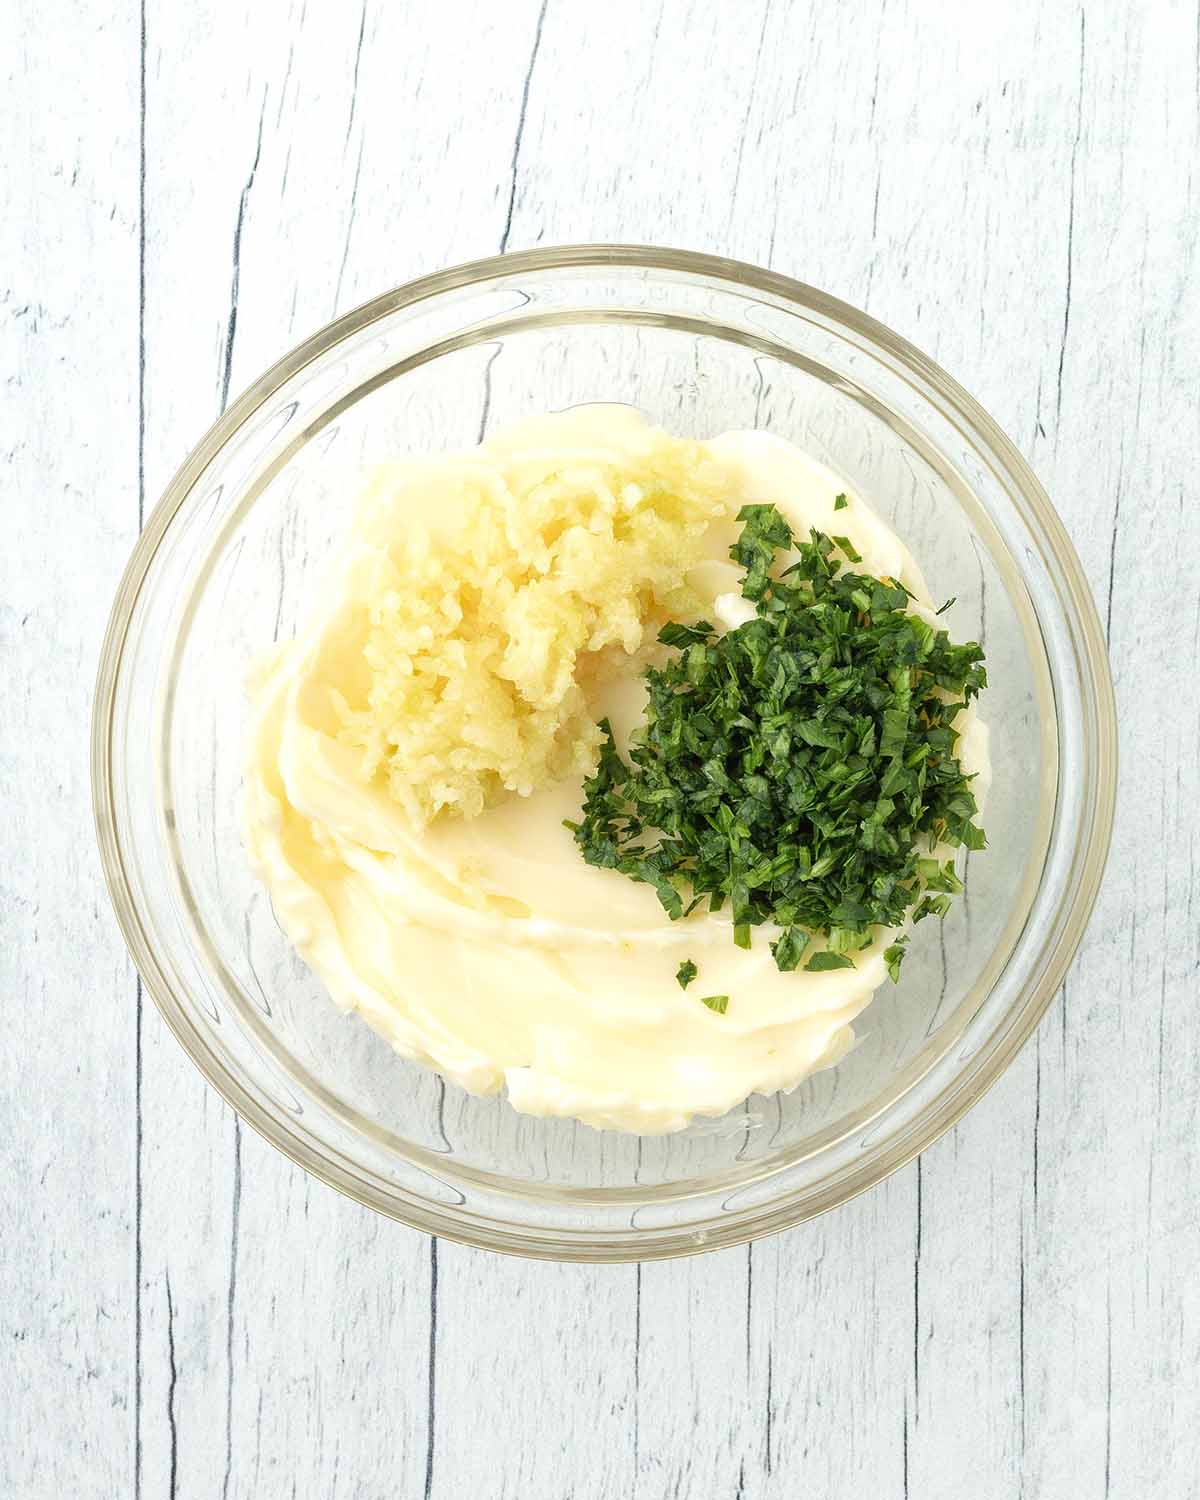 A small glass bowl filled with vegan margarine, chopped fresh parsley, and pressed garlic cloves.